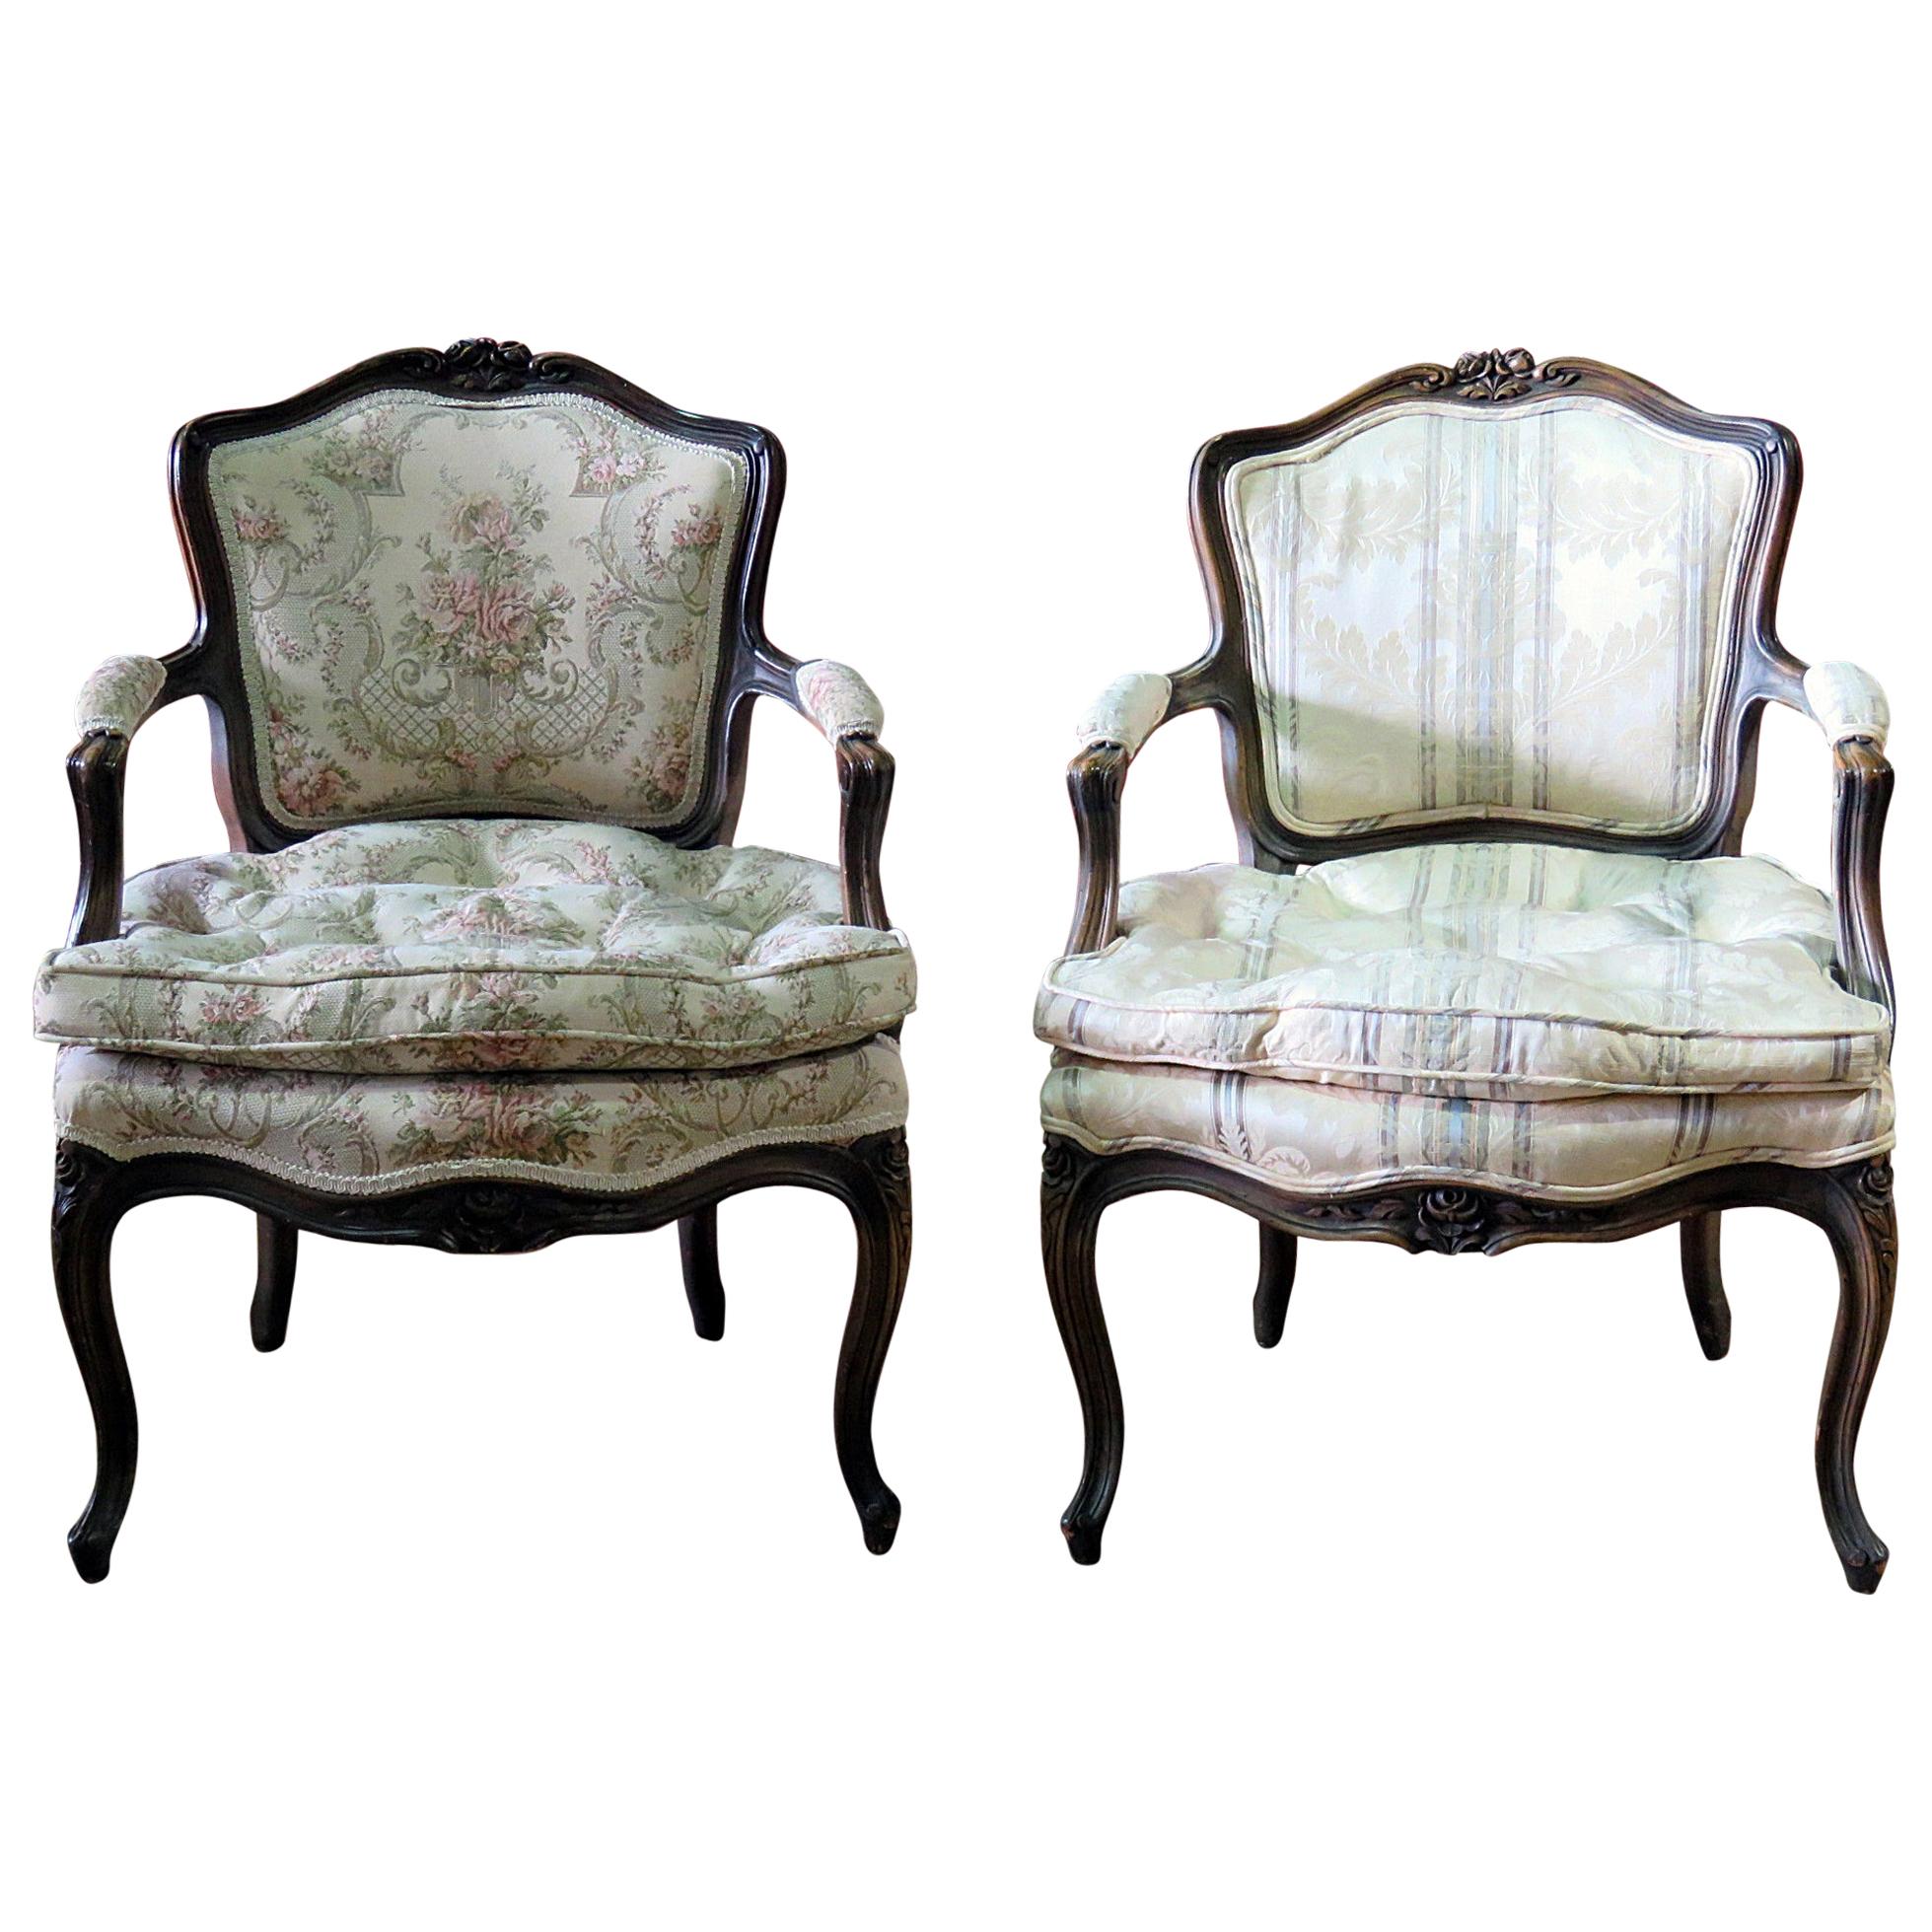 Companion Pair of Carved Walnut Tufted Louis XVI Style Fauteuils Armchairs 